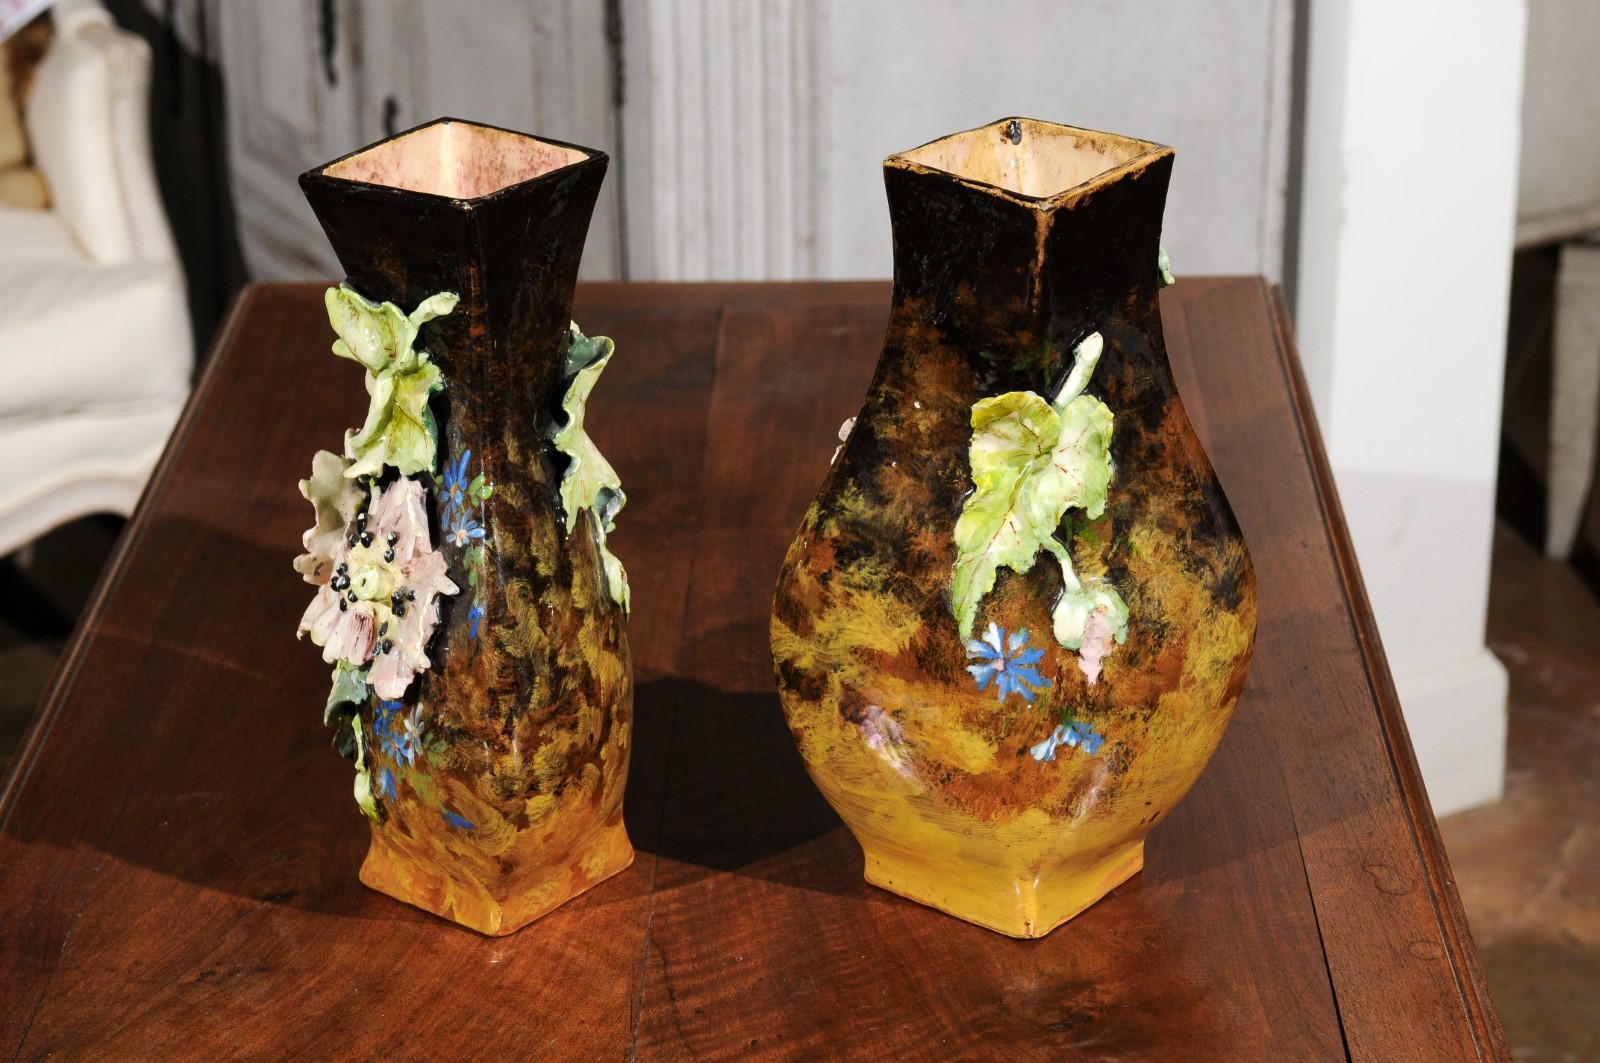 Pair of French 19th Century Vases with Barbotine Décor of Flowers and Leaves For Sale 3